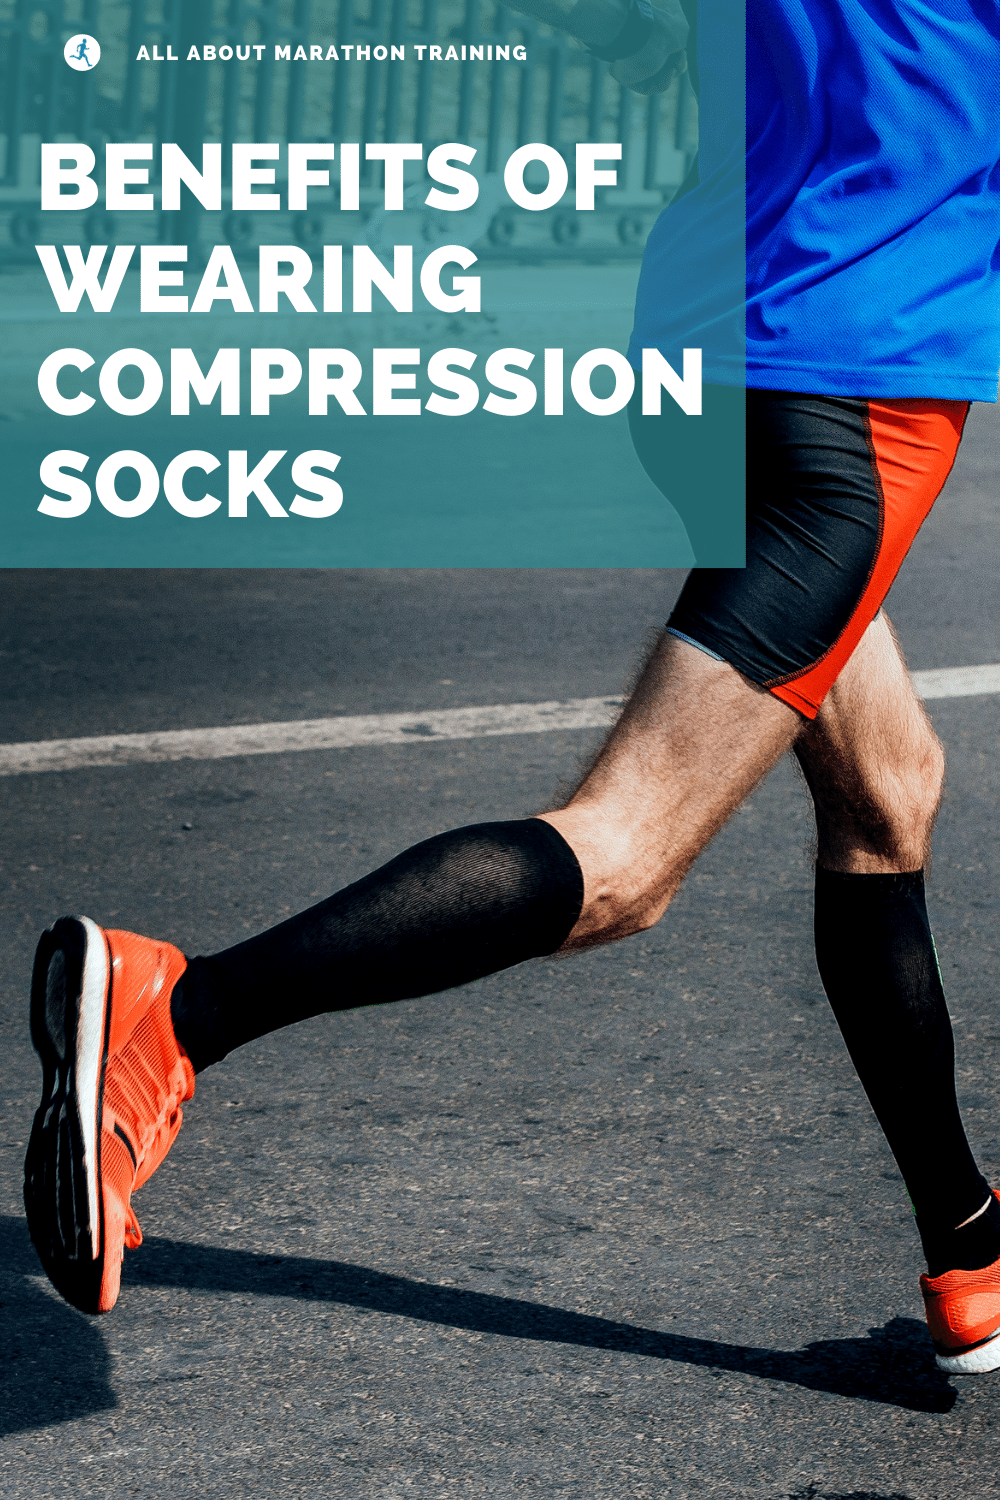 https://www.all-about-marathon-training.com/images/PINBenefitsCompressionSocks.png